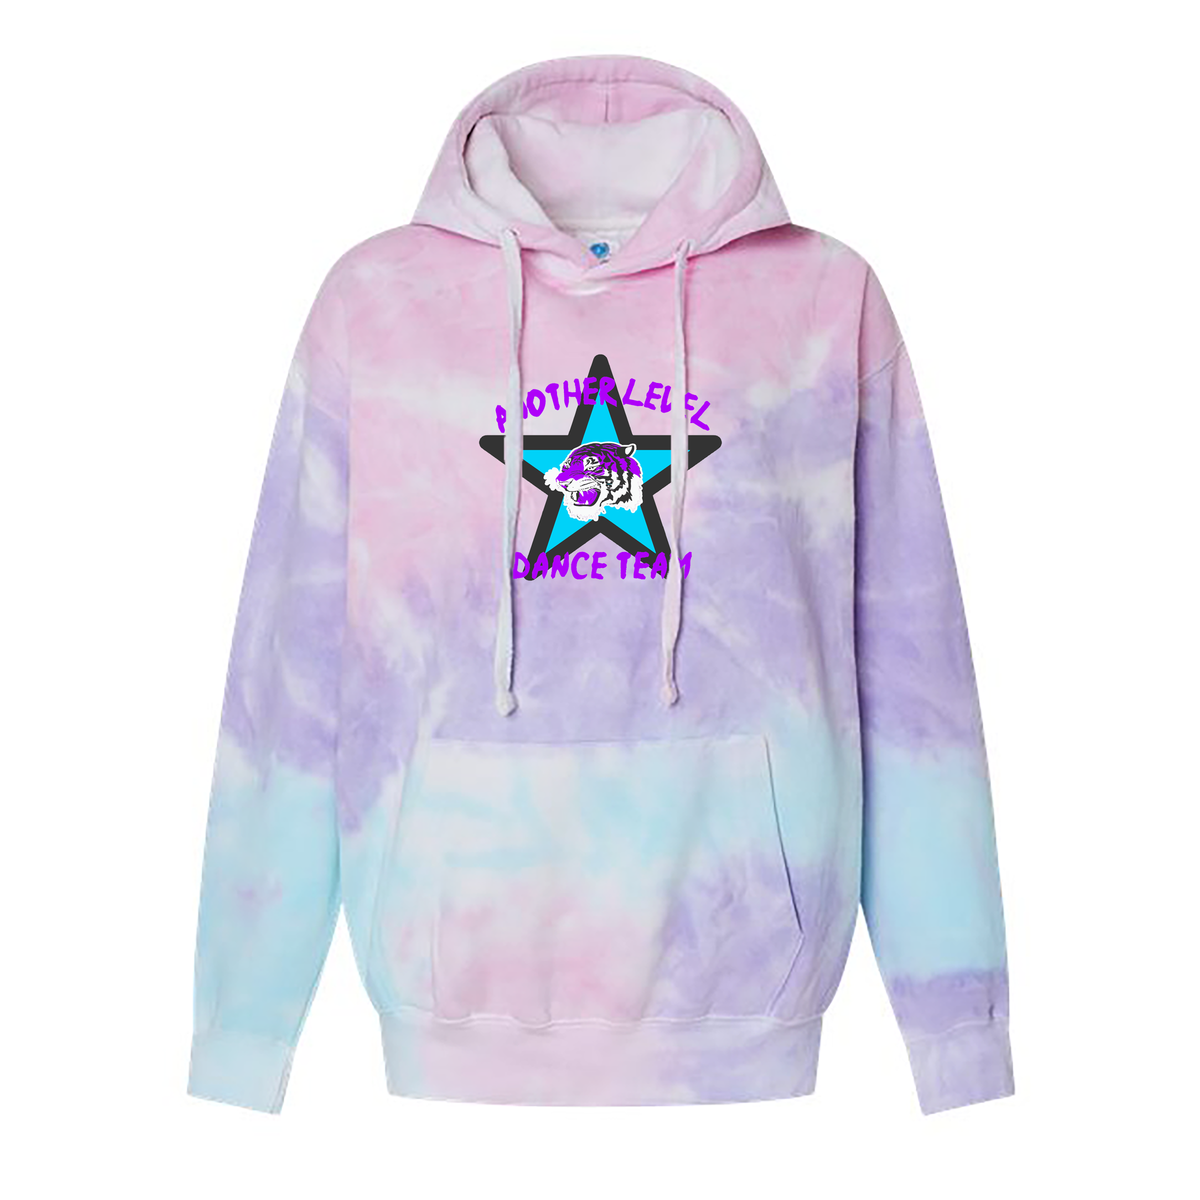 Another Level Dance Team Tie-Dyed Hooded Sweatshirt